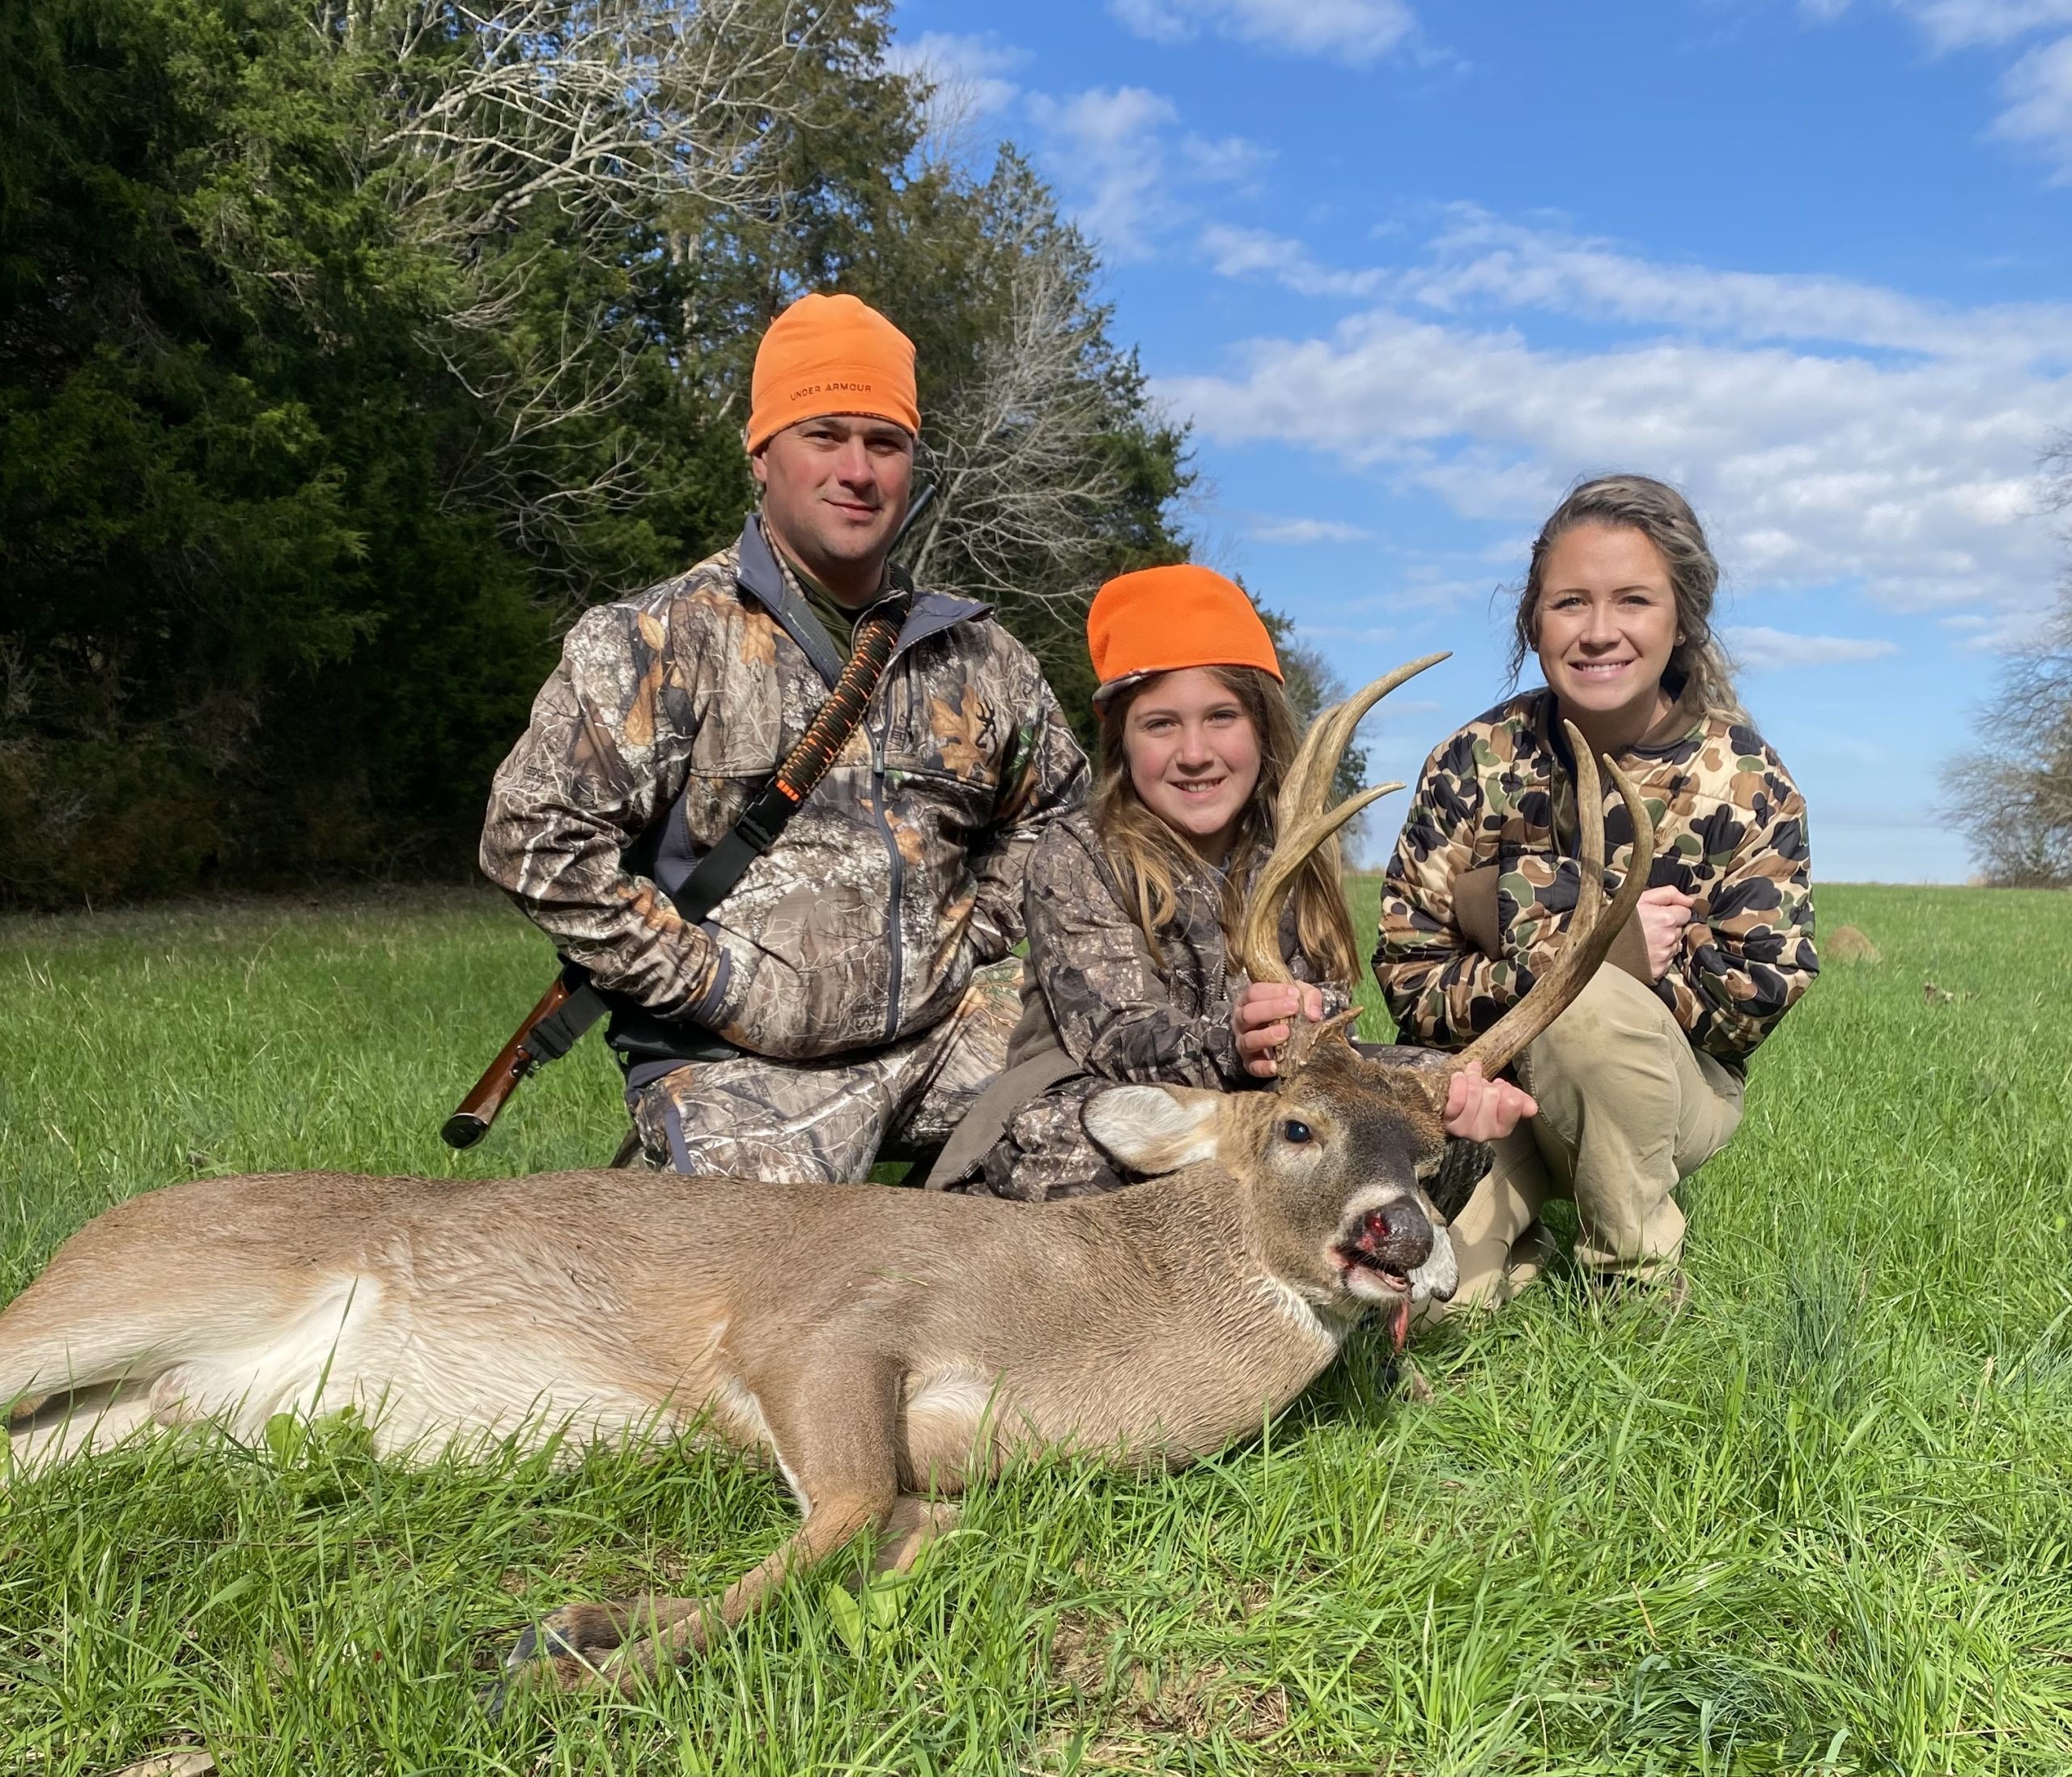 Youth hunt dates announced for Forever Wild Field Trial Area